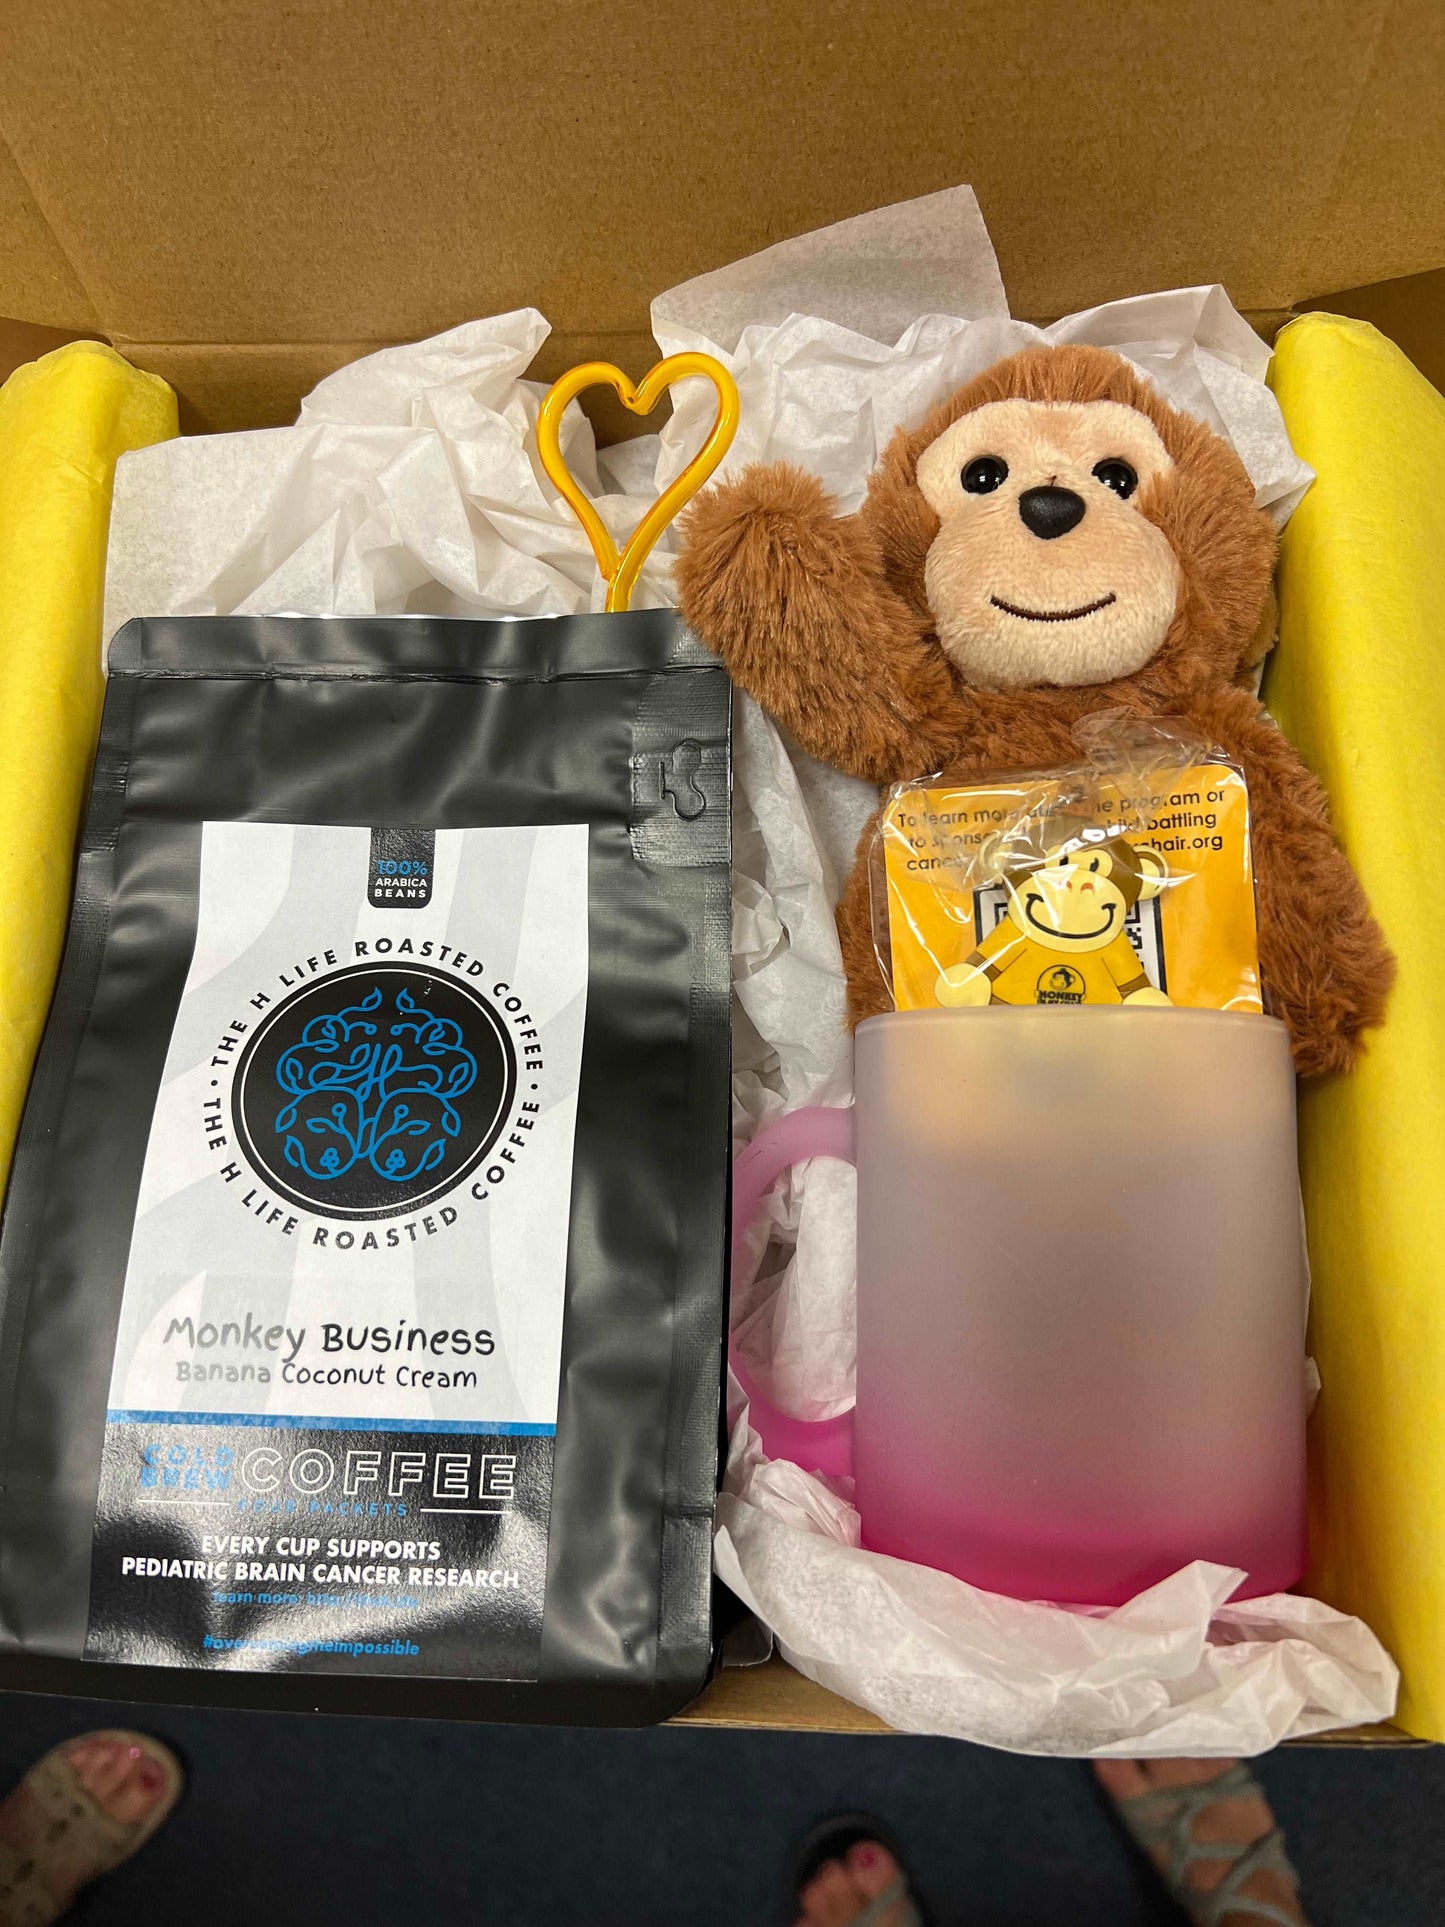 Boxes of Hope: Monkey Business